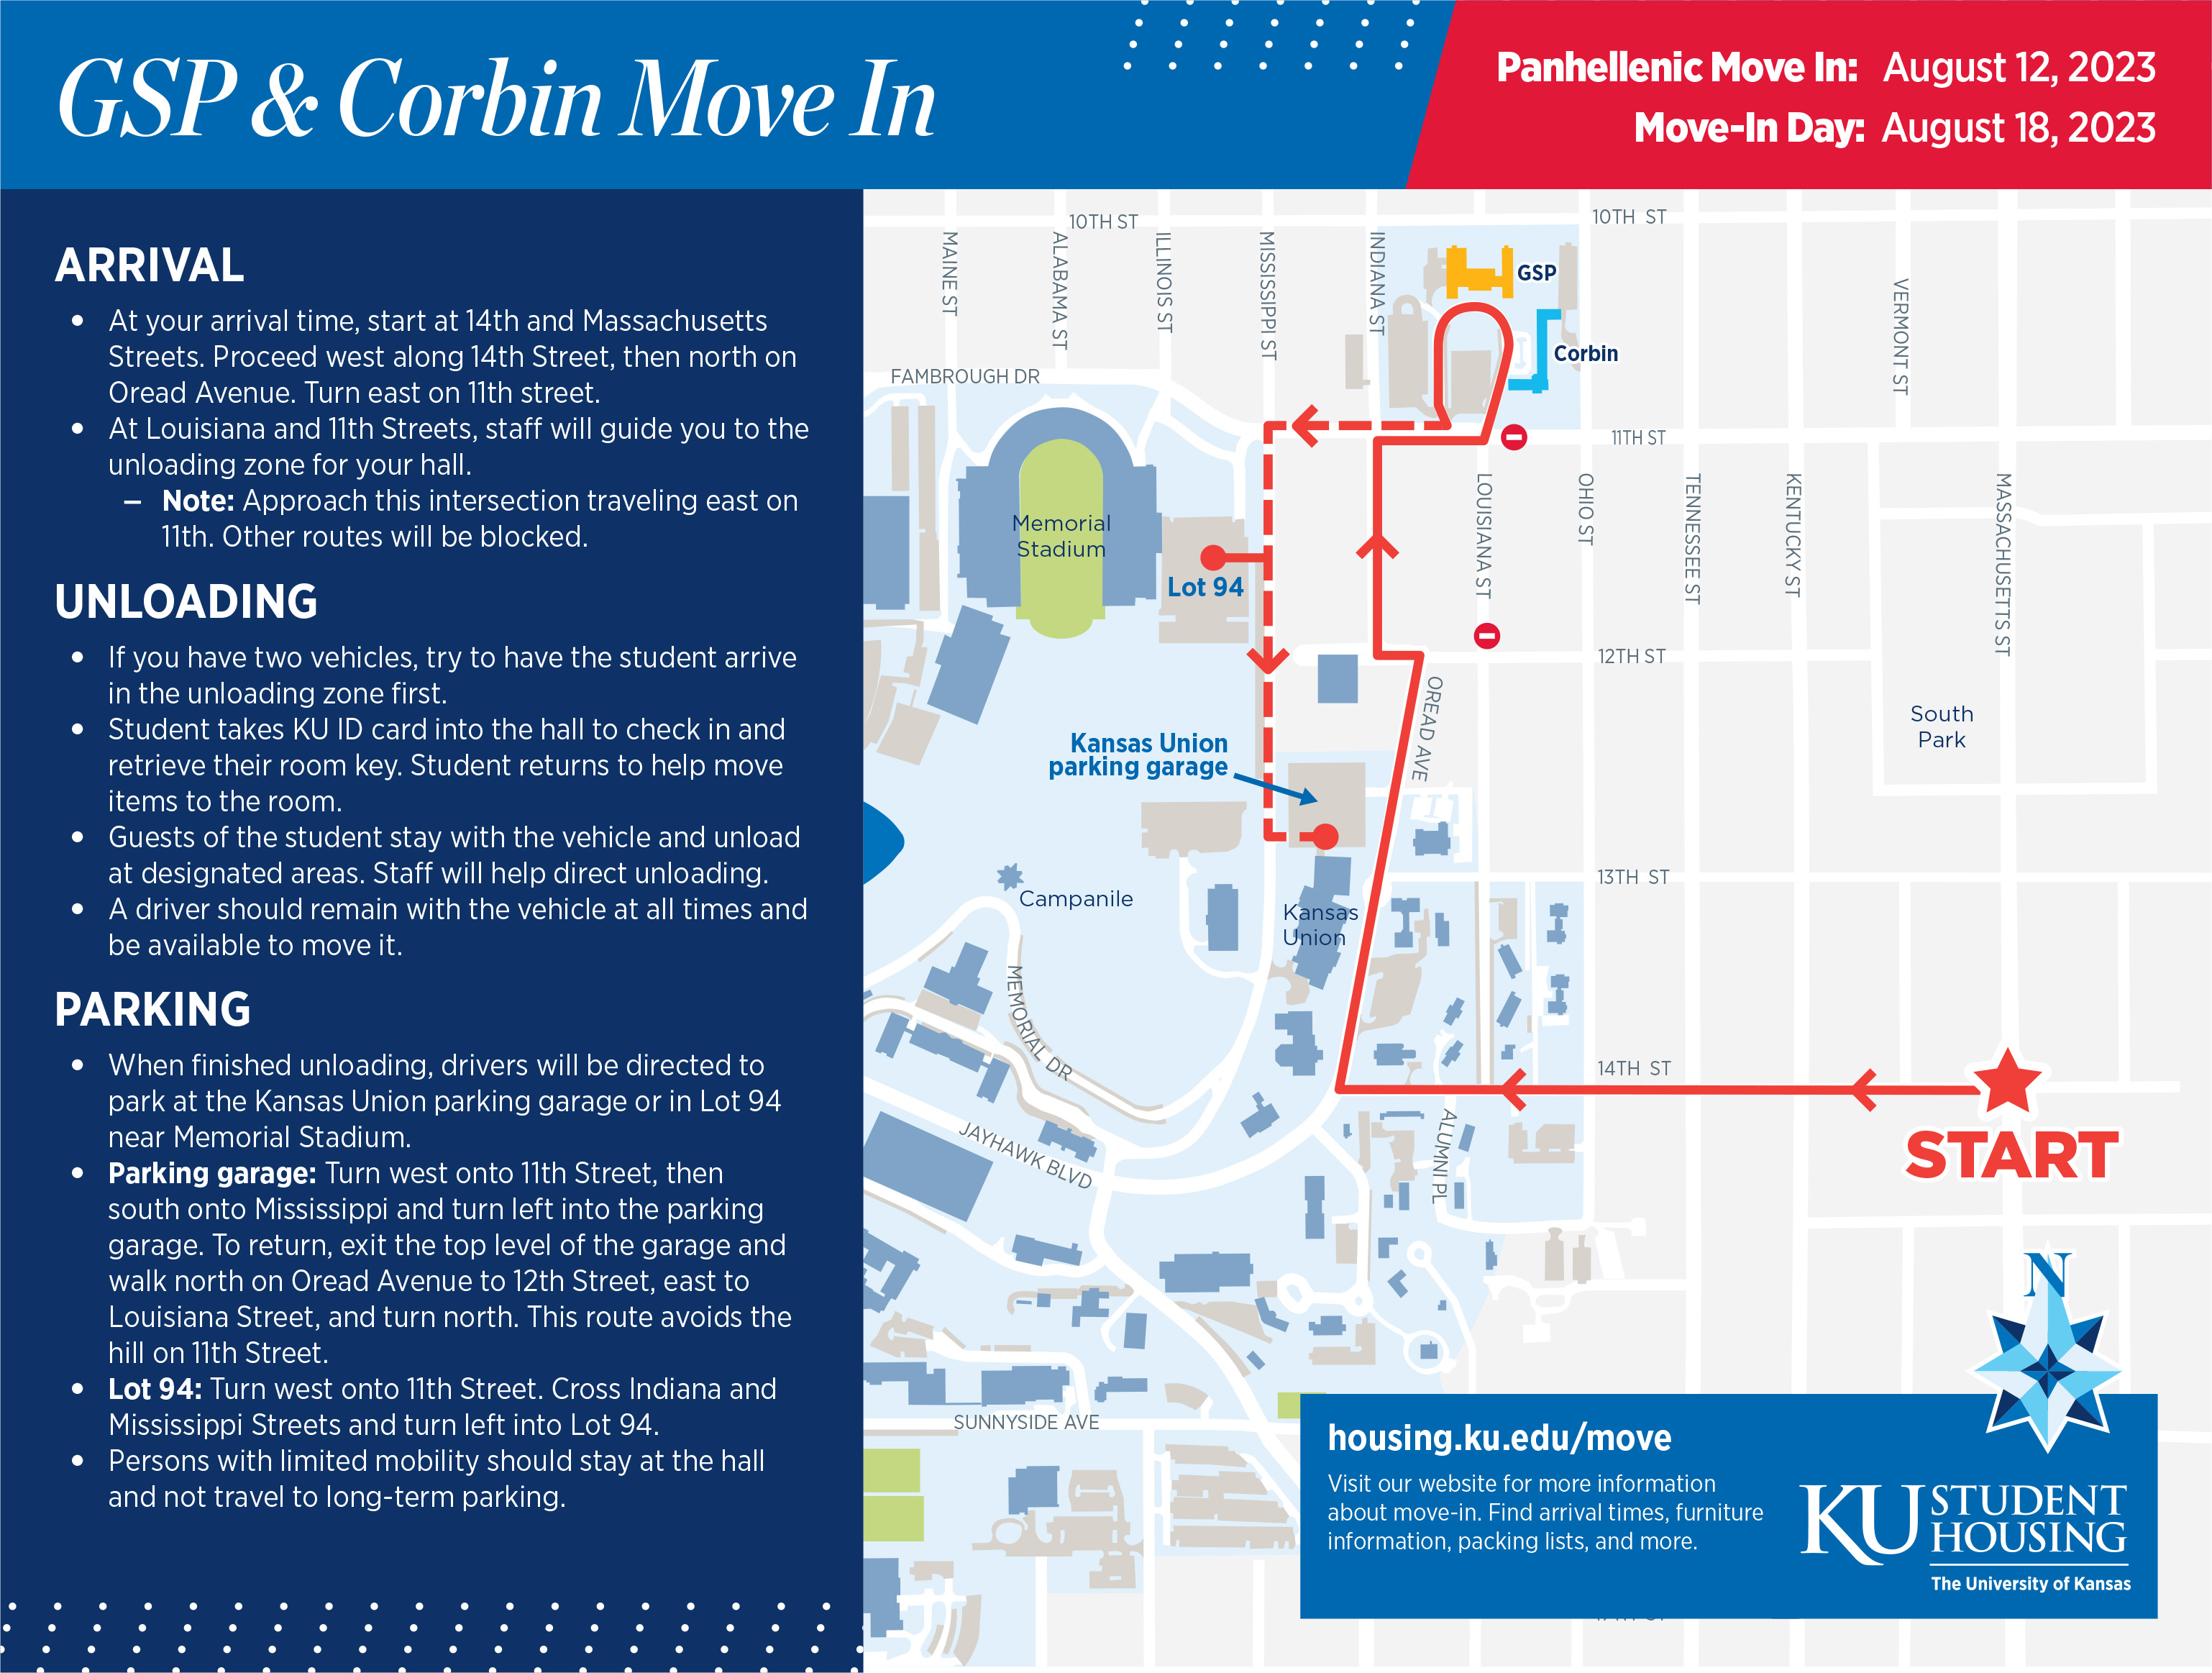 GSP Corbin move-in map preview image